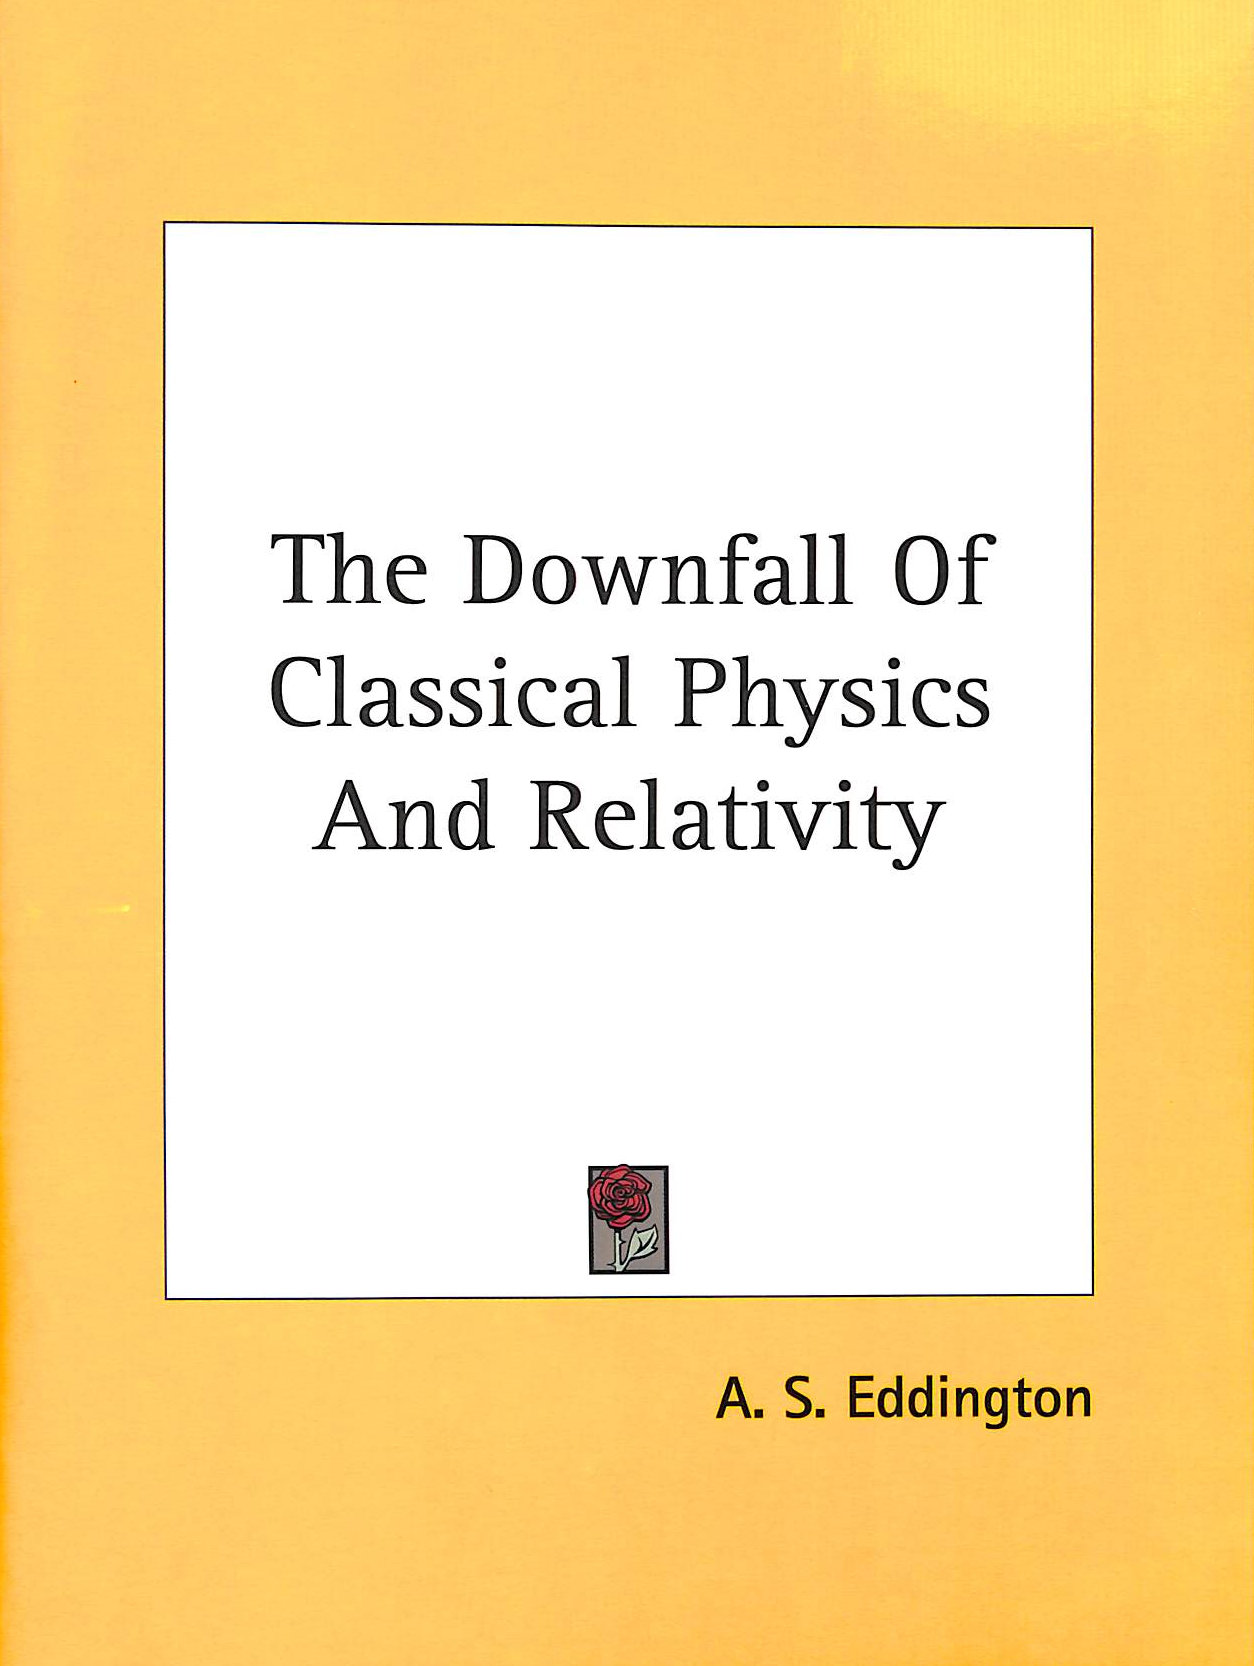 EDDINGTON, A. S. - The Downfall Of Classical Physics And Relativity